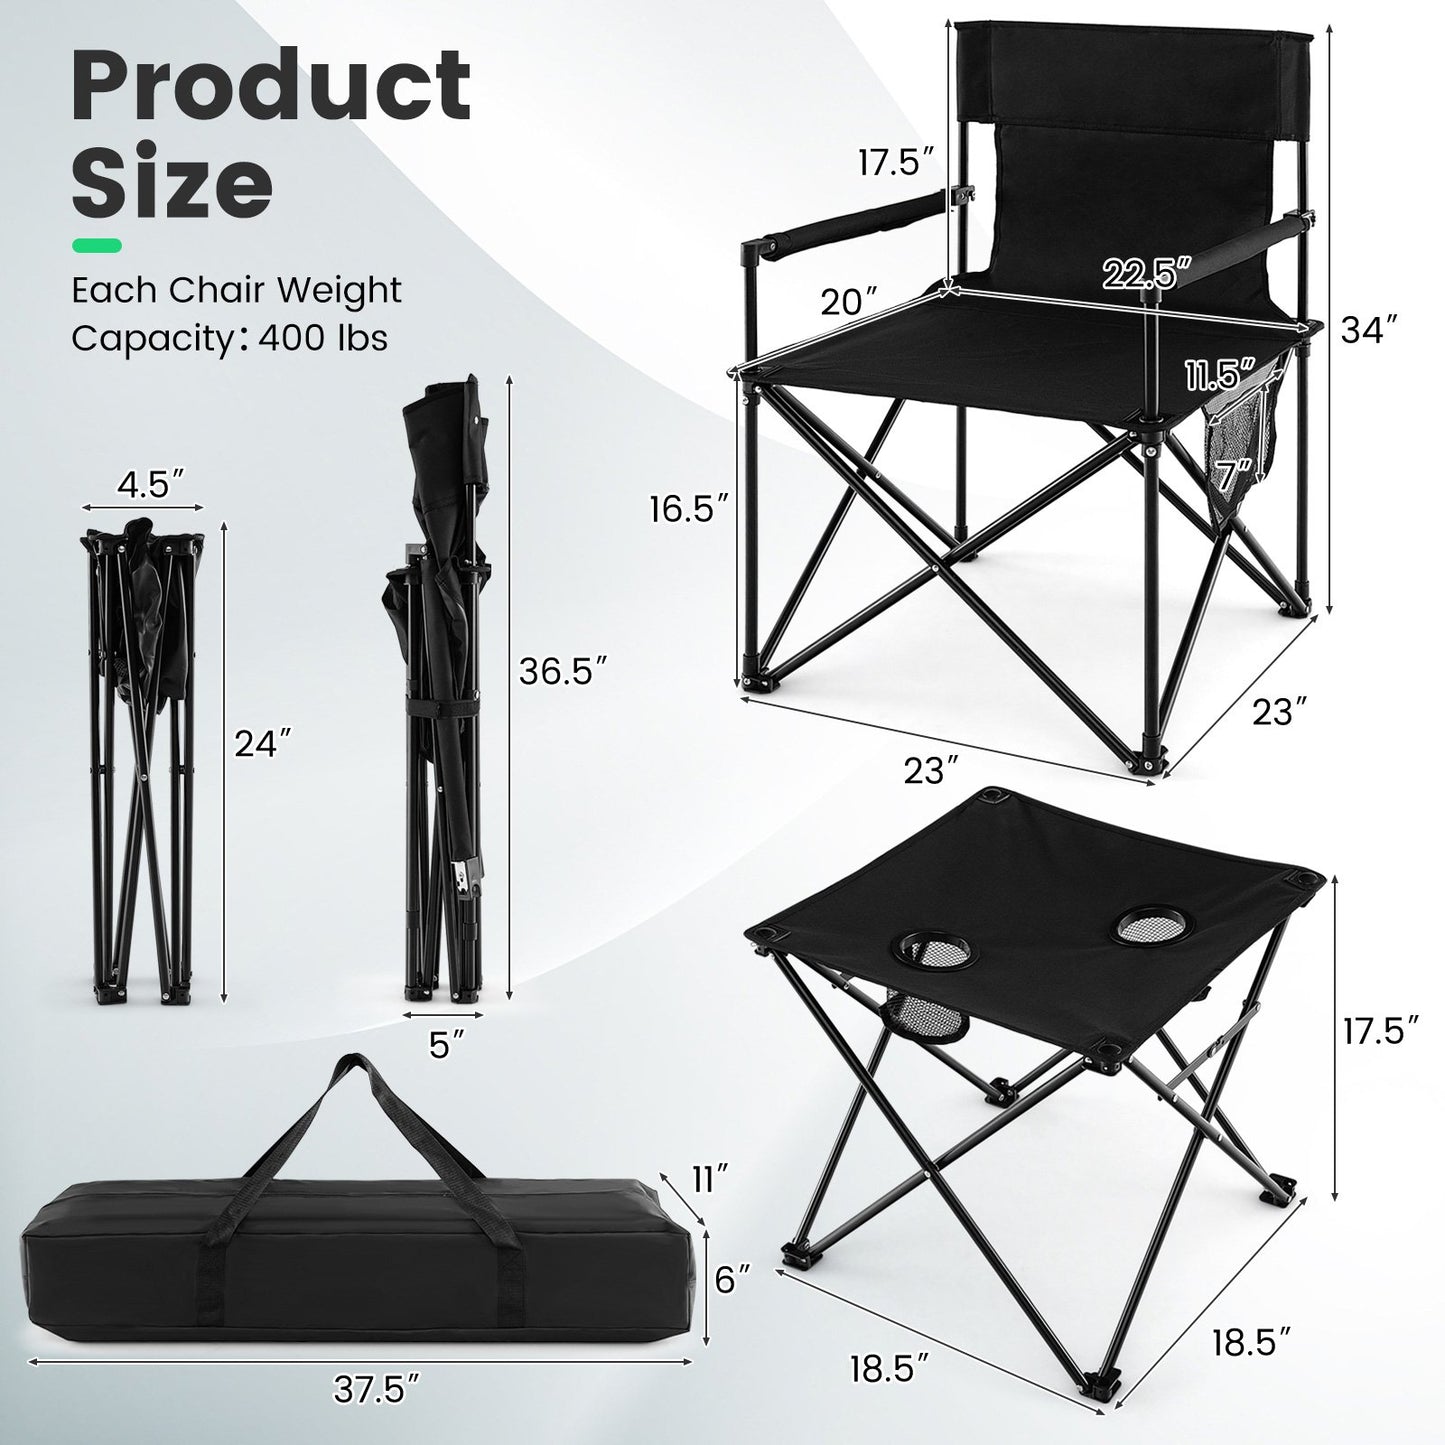 Outdoor Folding Camping Chairs and Table Set with Carrying Bag, Black